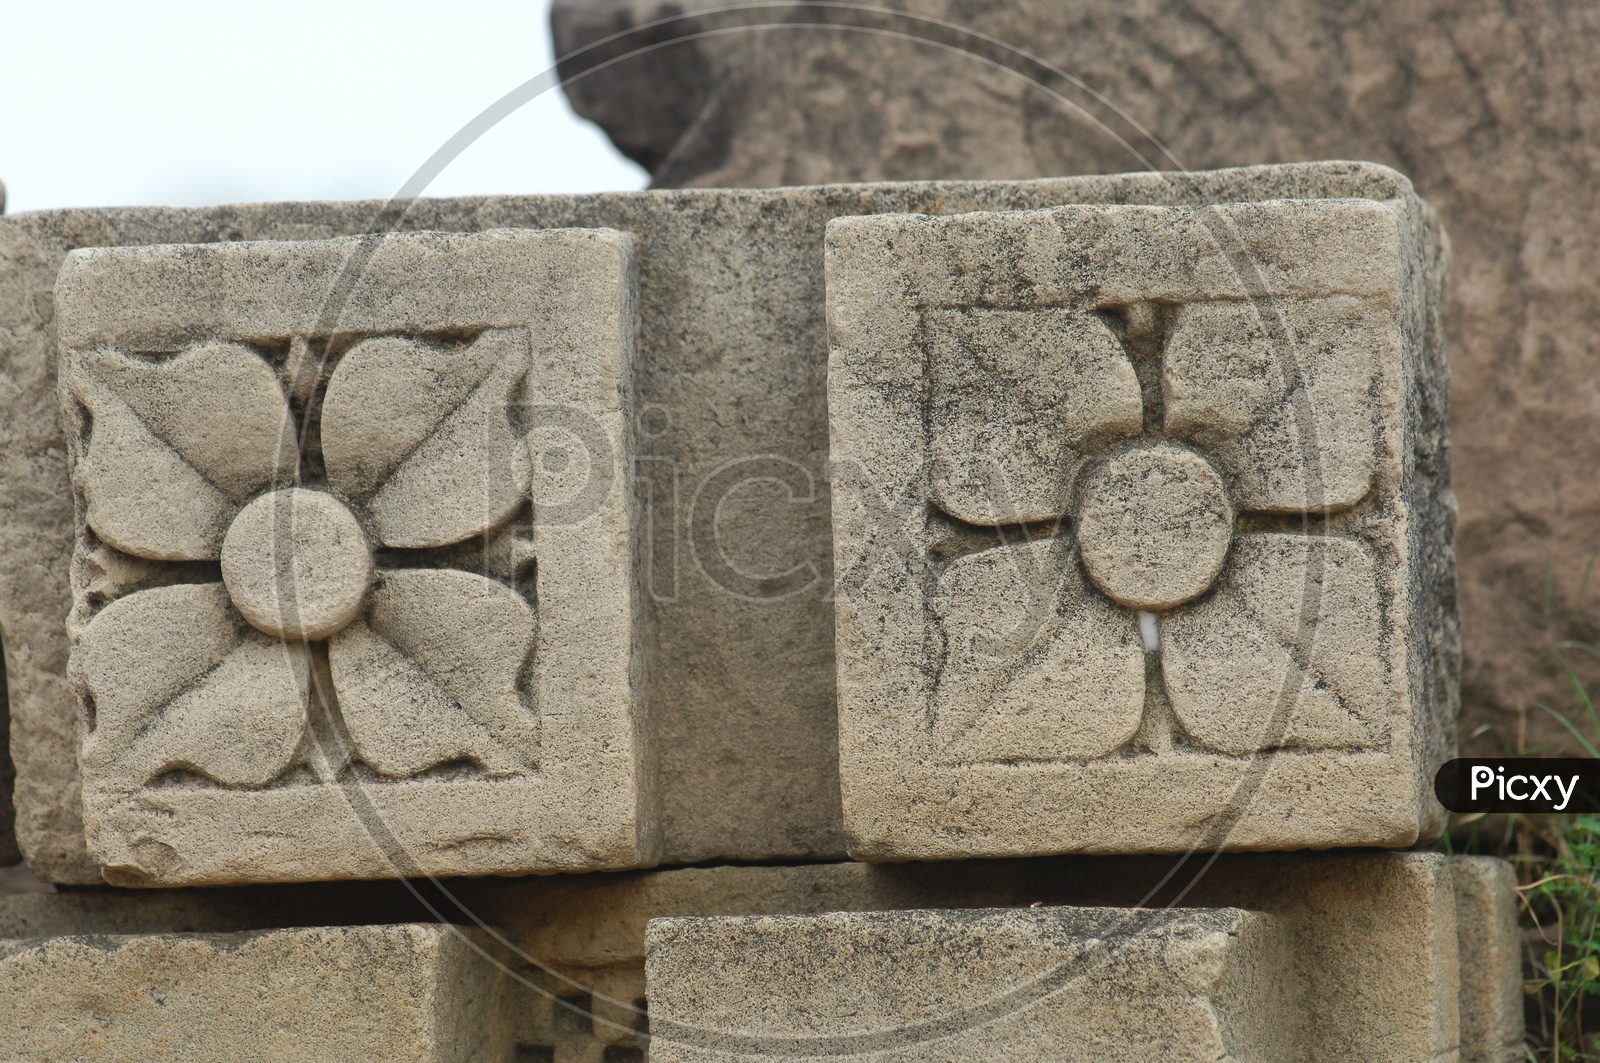 Stone carvings